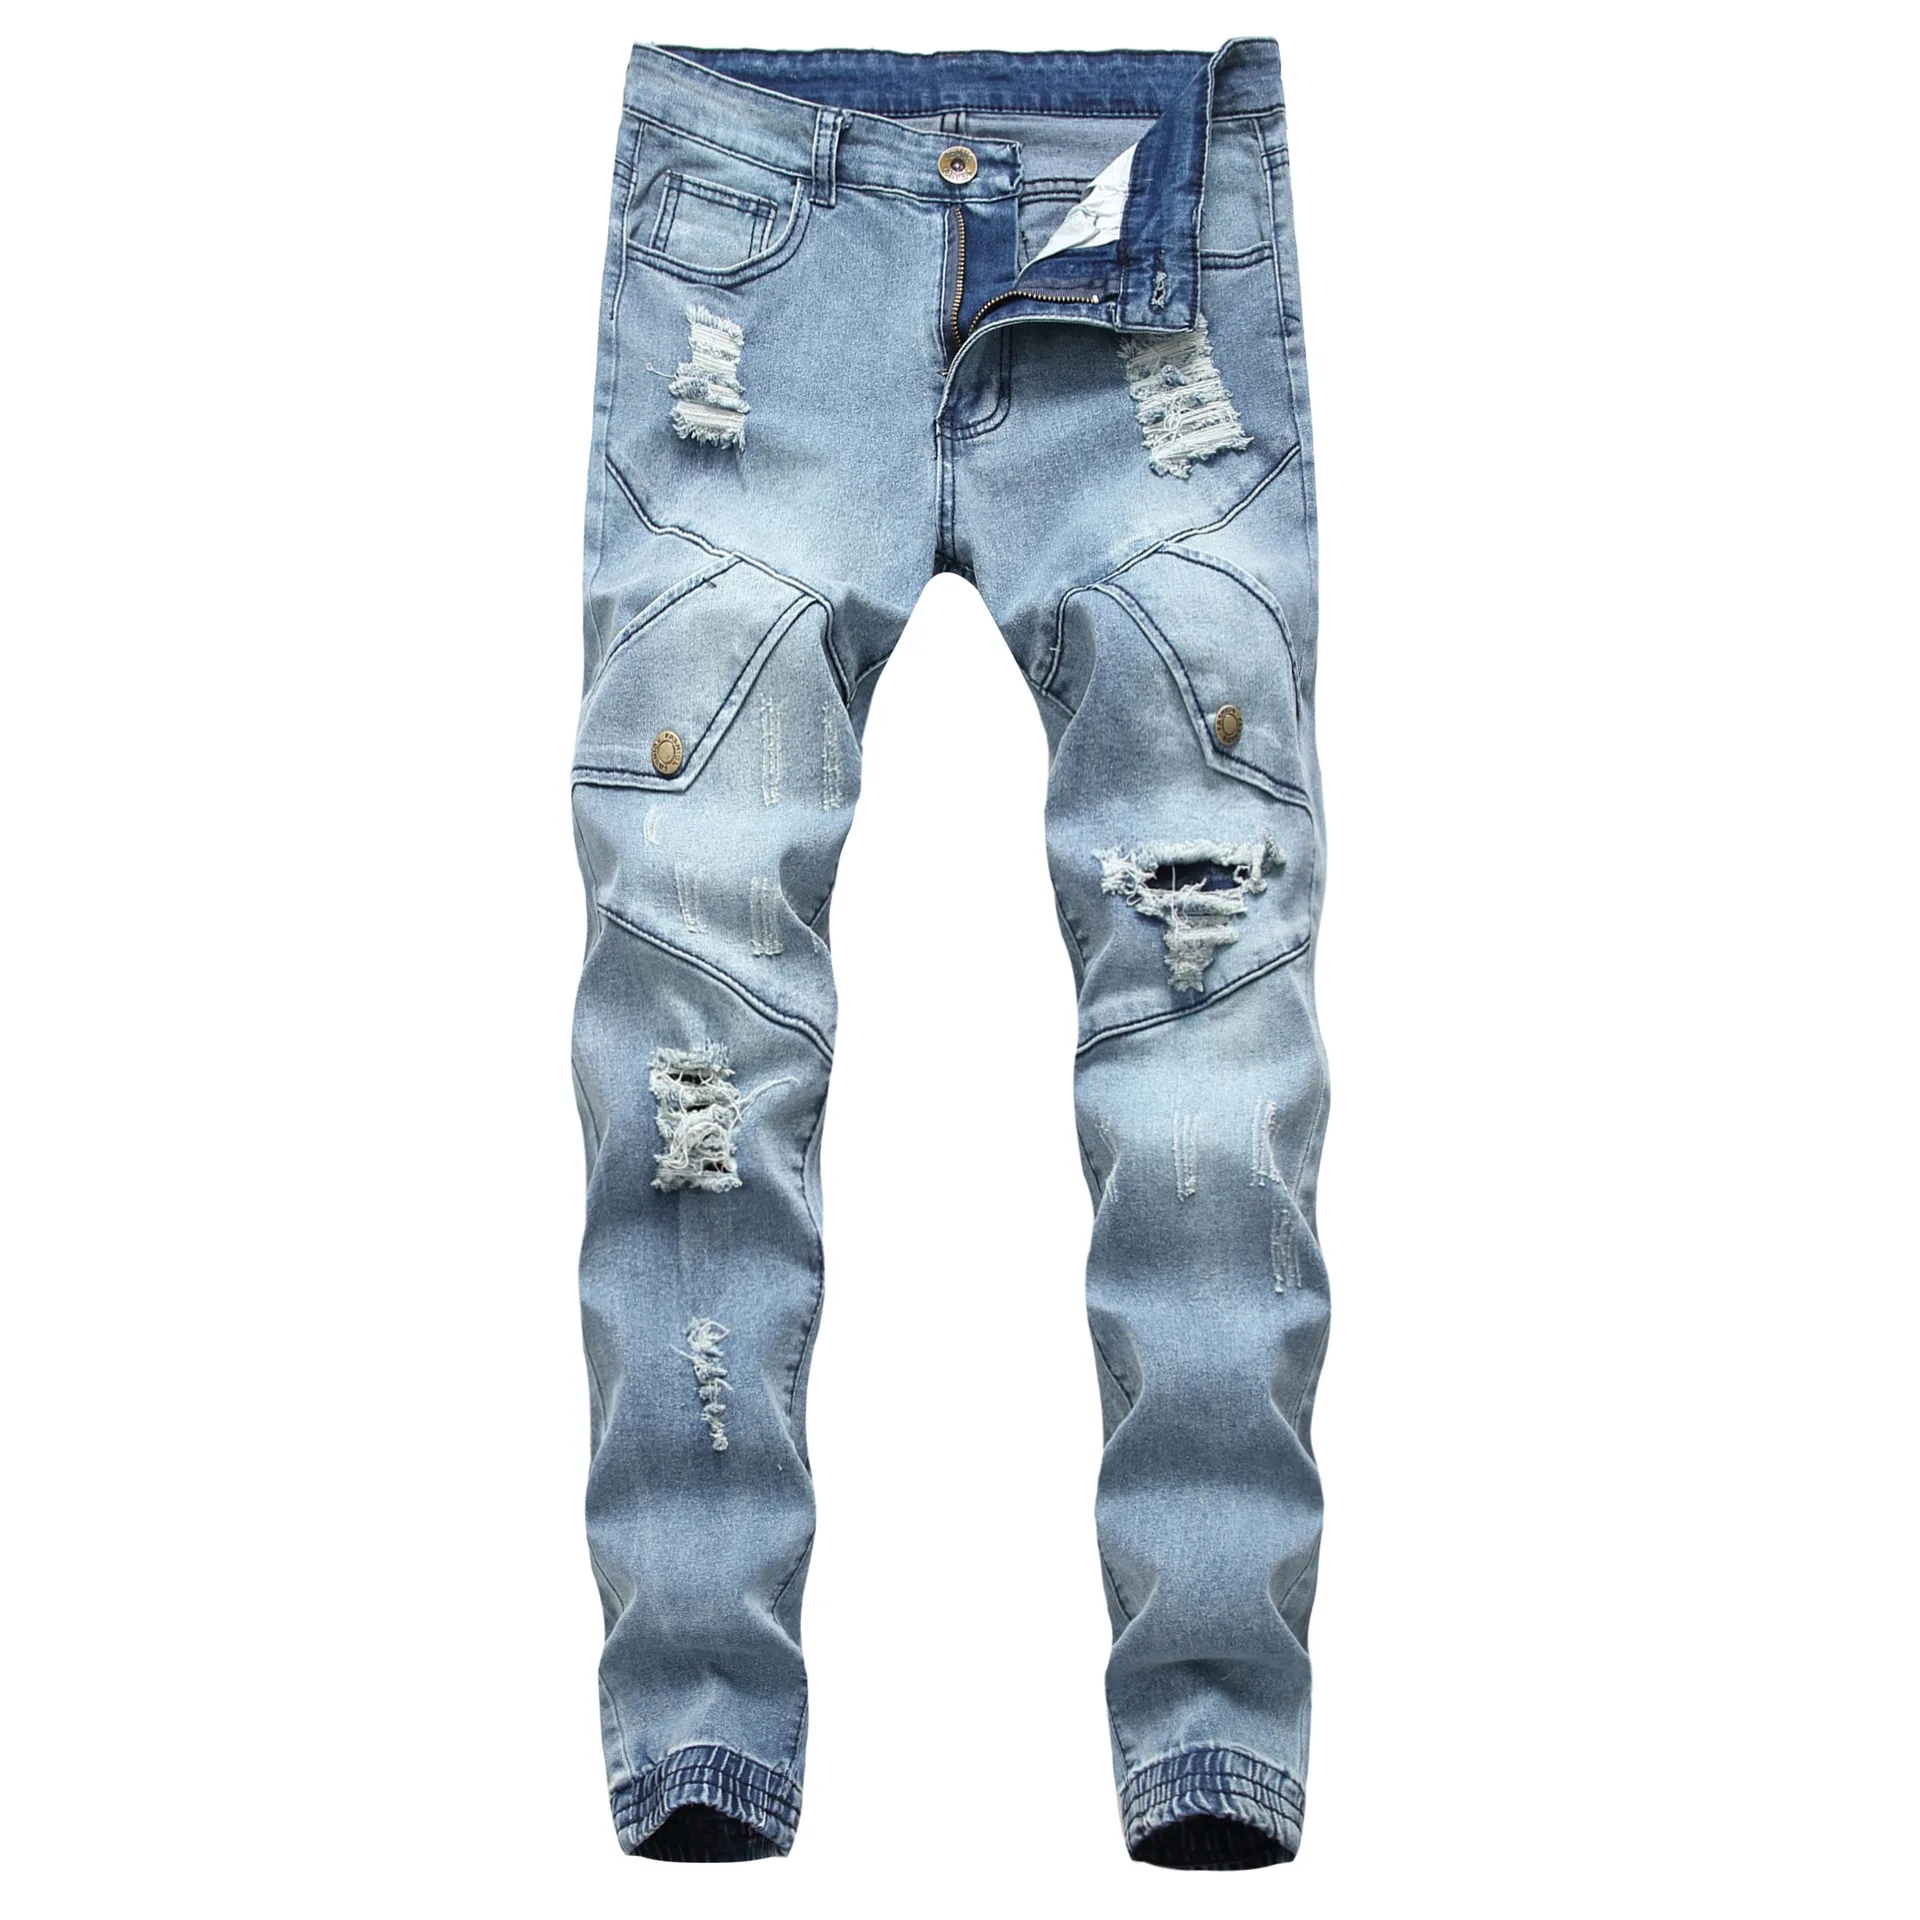 New Model Jeans Pent Style Bangladesh New Pattern Jeans 272593 - Buy ...